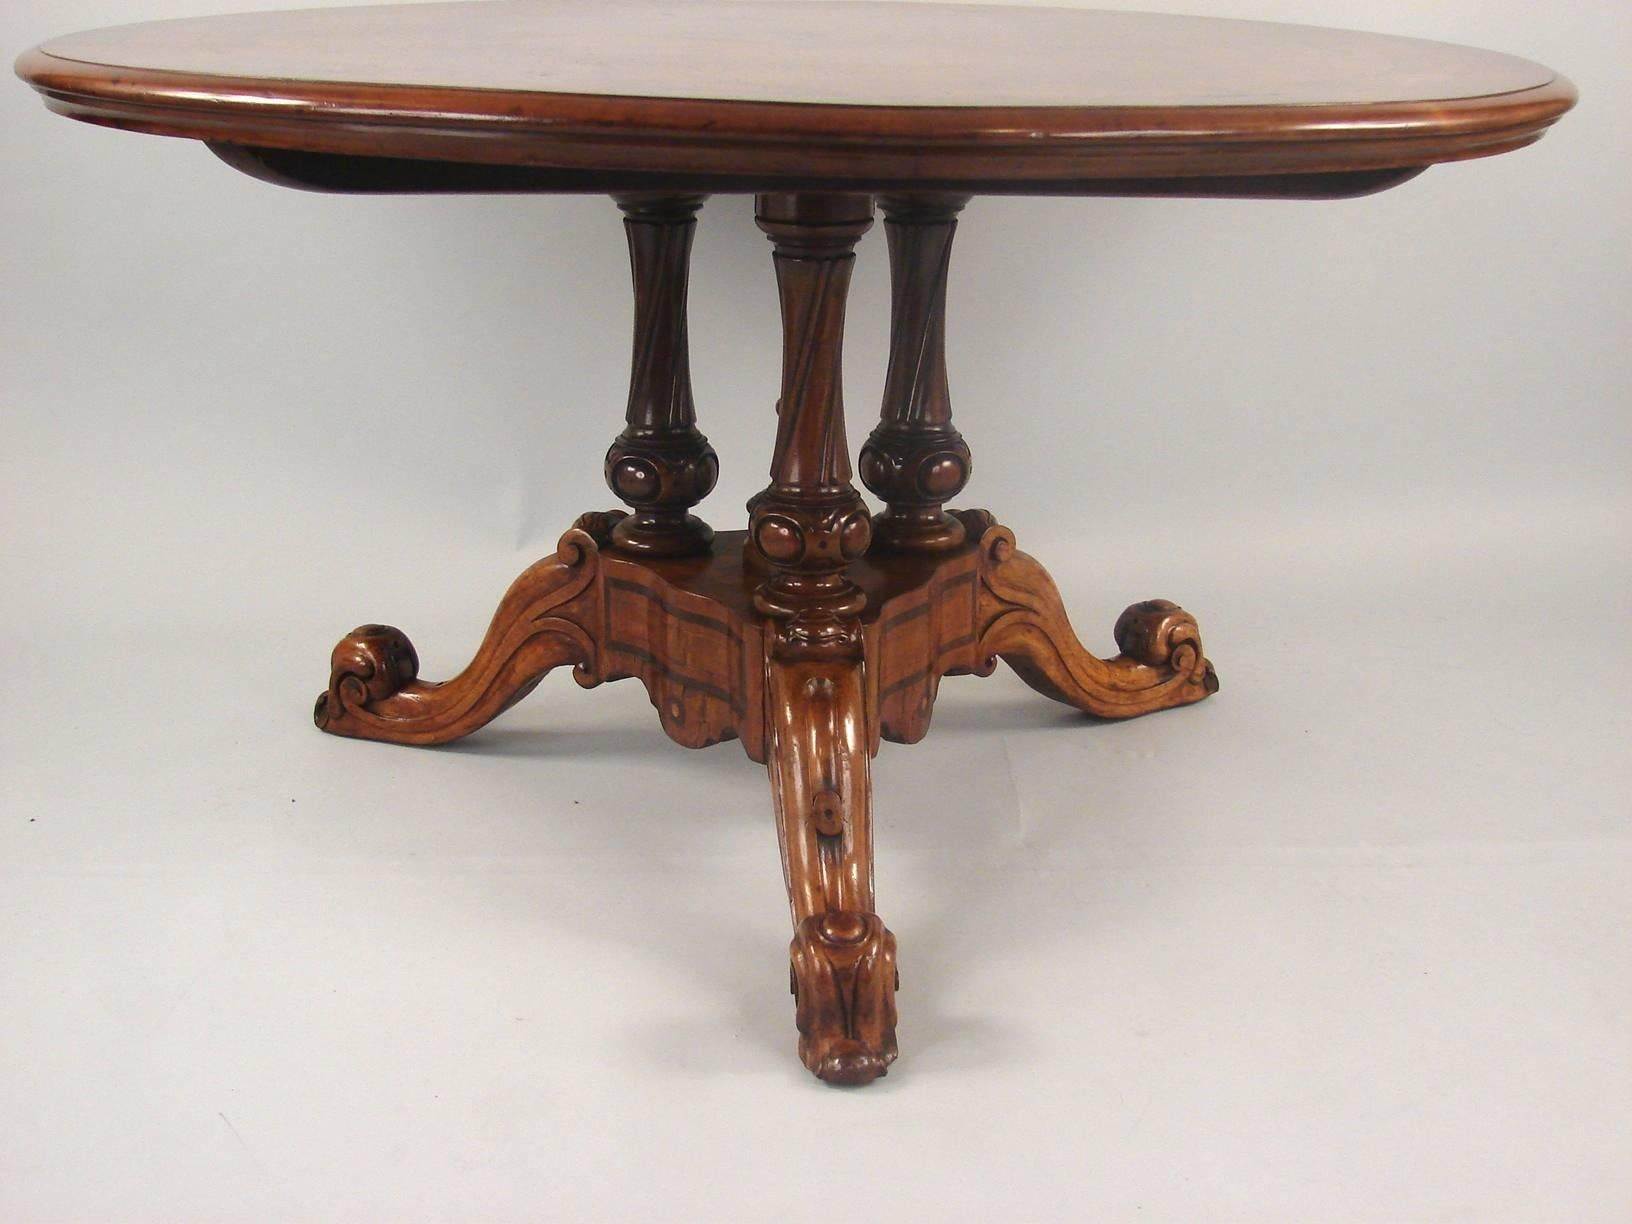 A good quality English walnut center table, the top with figured contrasting burl inlays and a crossbanded edge, supported on three twist carved standards terminating in a tripod base with upturned scroll feet, circa 1860.